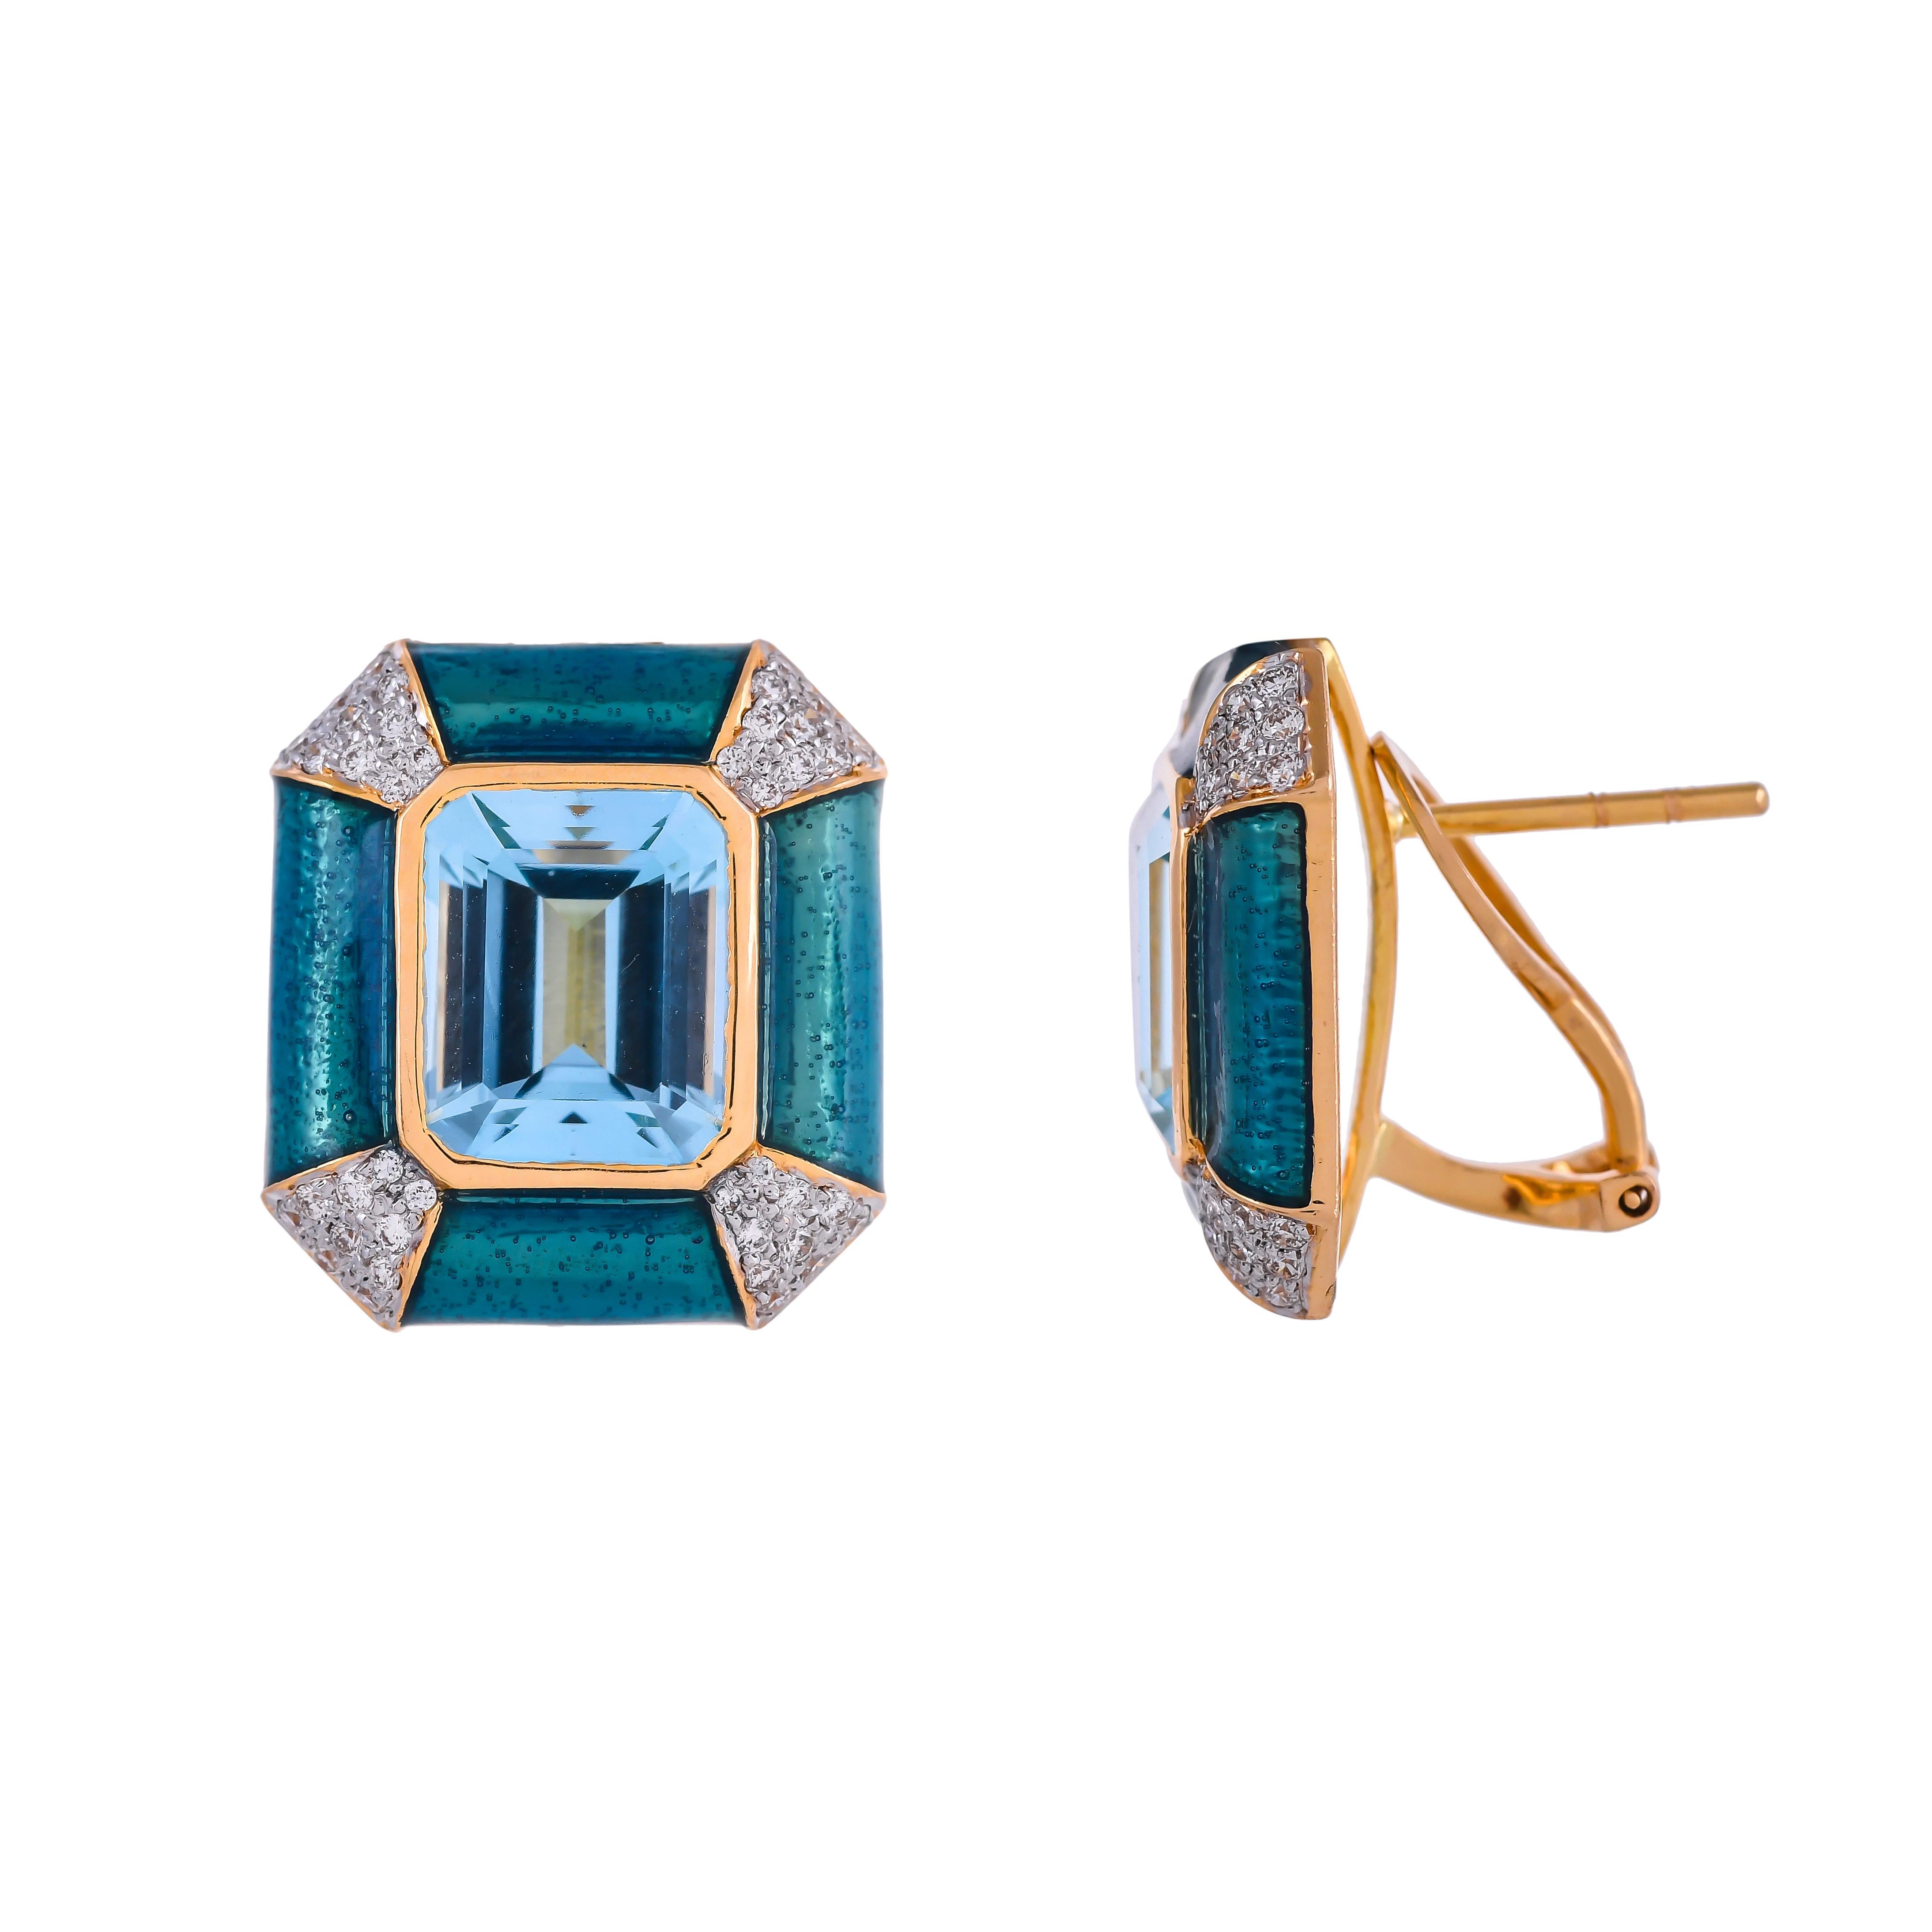 Mounted in 18 karats yellow gold, this contemporary and bold statement stud earrings are from the collection 'color story'. The rectangular panel is set with an octagon-shaped sky blue topaz weighing approximately 11.34 carats, framed by matching